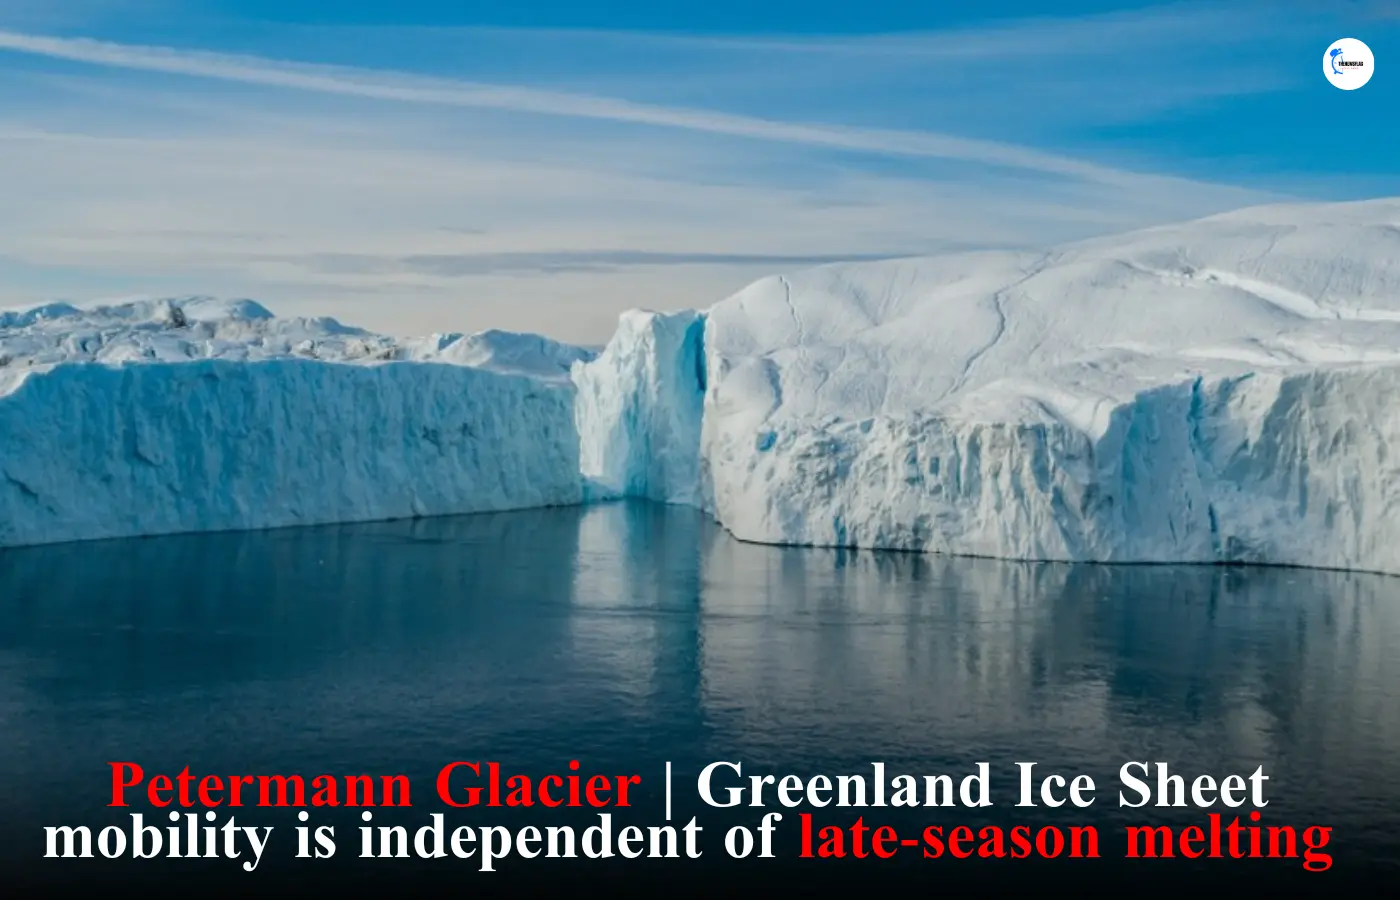 Greenland Ice Sheet mobility is independent of late-season melting